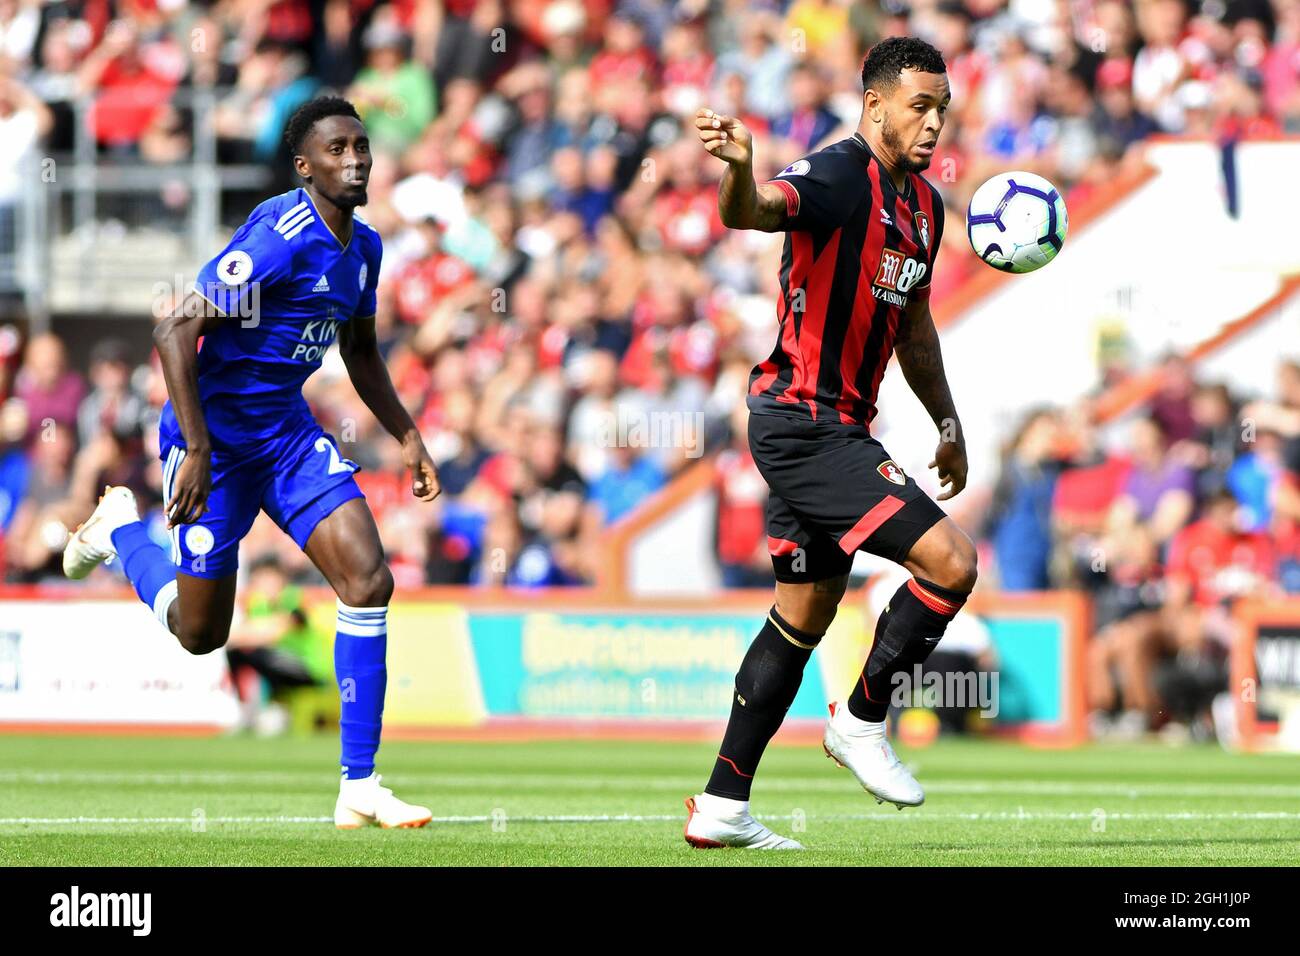 Joshua King, of AFC Bournemouth bursts past Wilfred Ndidi of Leicester City - AFC Bournemouth v Leicester City, Premier League, Vitality Stadium, Bournemouth - 15th September 2018 Stock Photo - Alamy